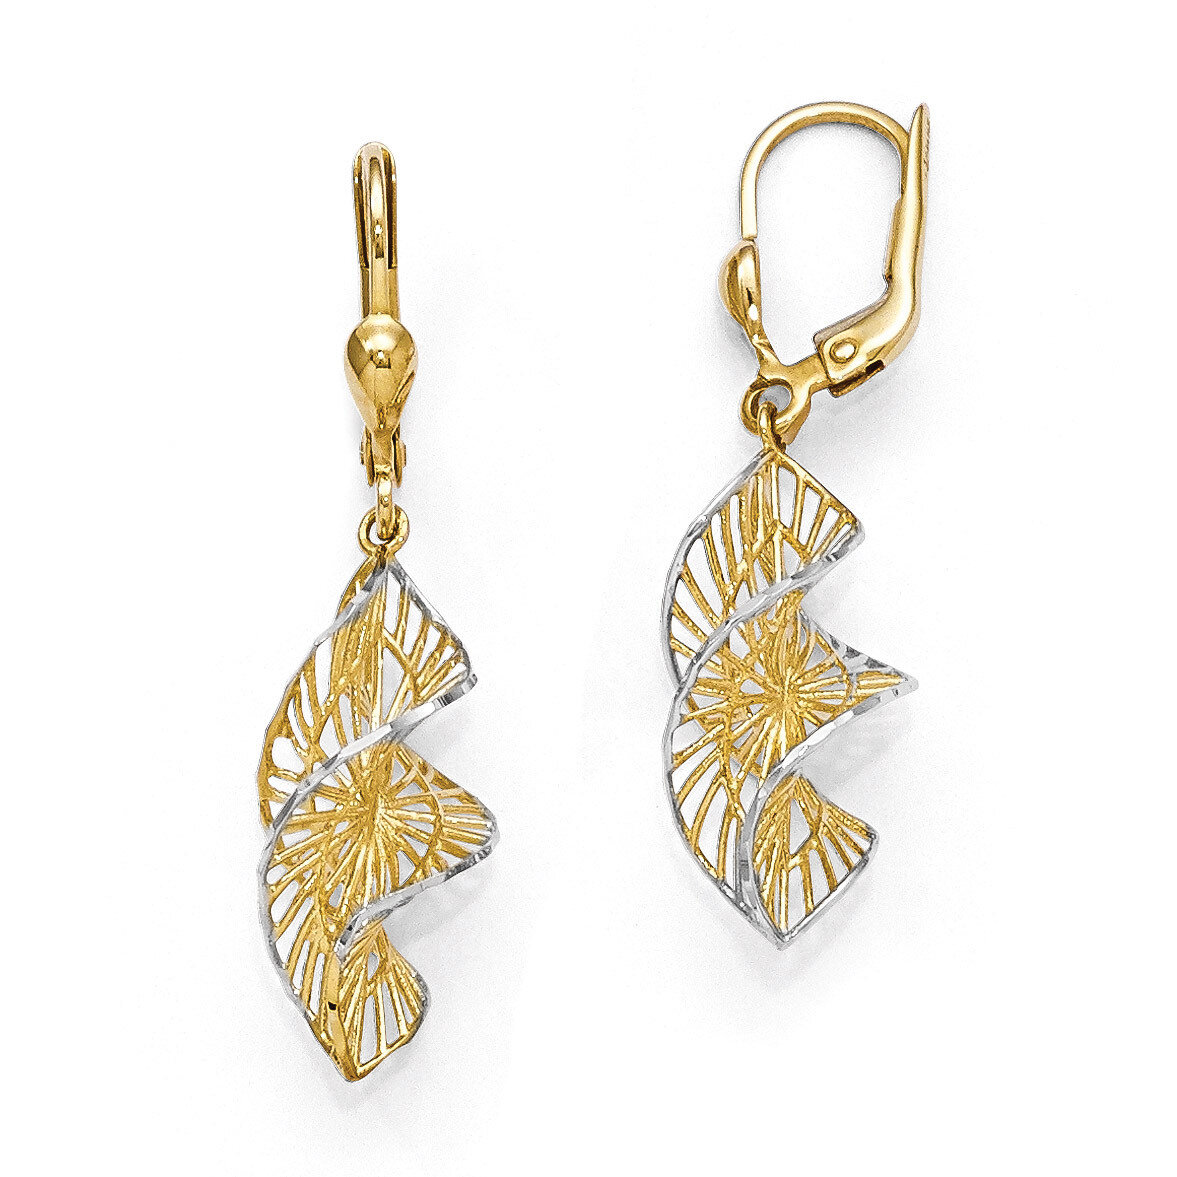 White Rhodium Textured and Diamond-cut Leverback Earrings - 14k Gold HB-LE668